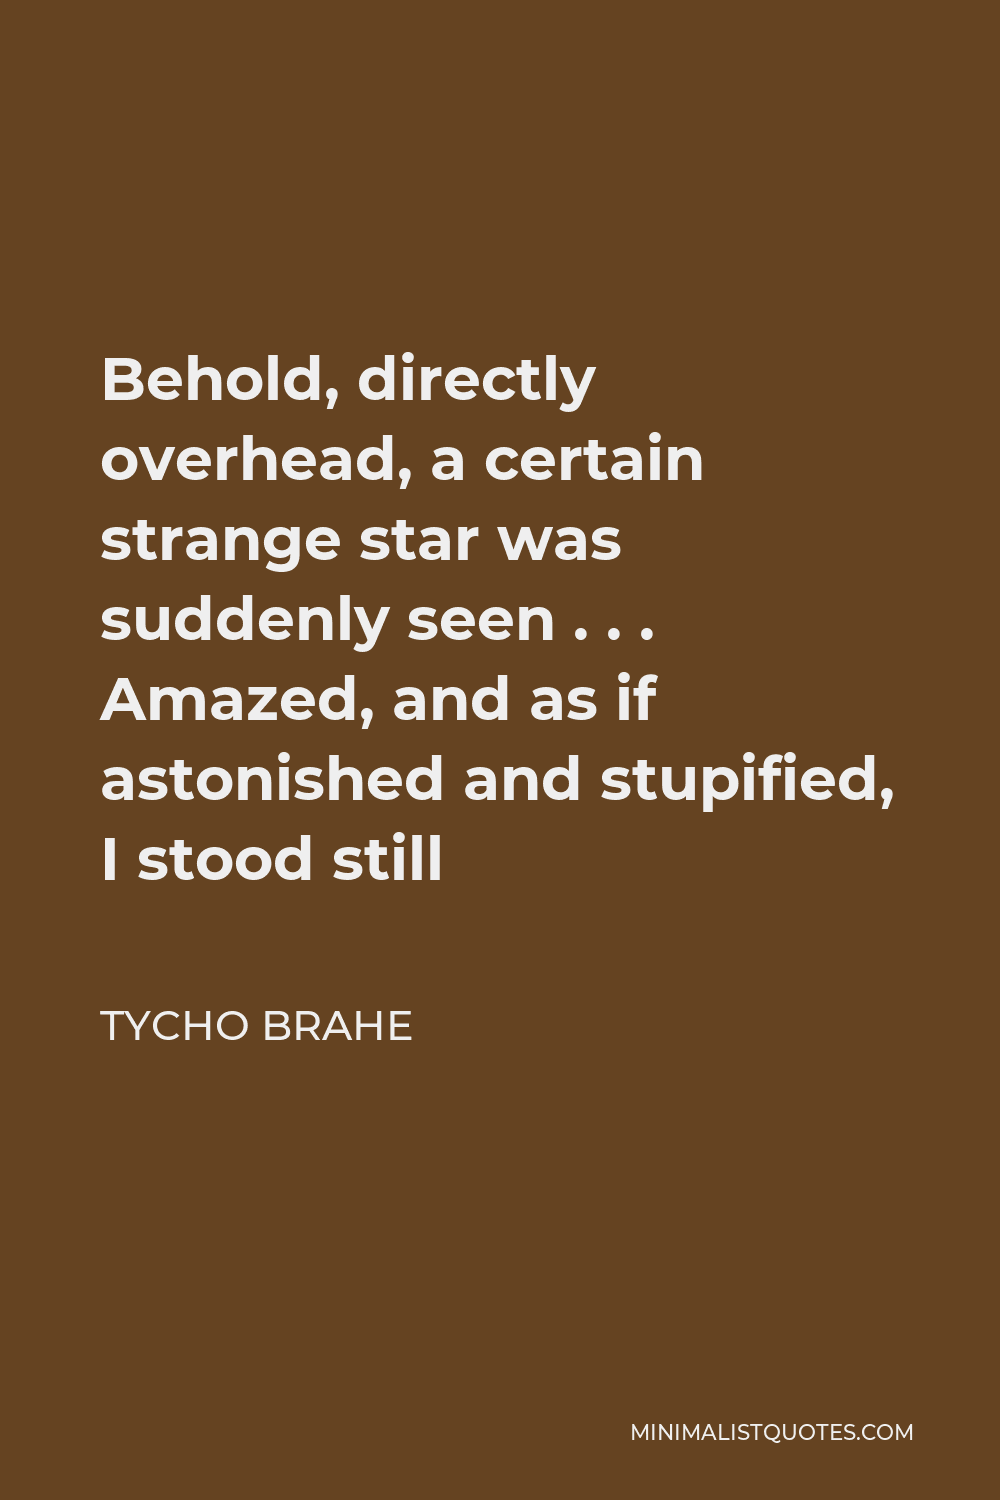 Tycho Brahe Quote - Behold, directly overhead, a certain strange star was suddenly seen . . . Amazed, and as if astonished and stupified, I stood still